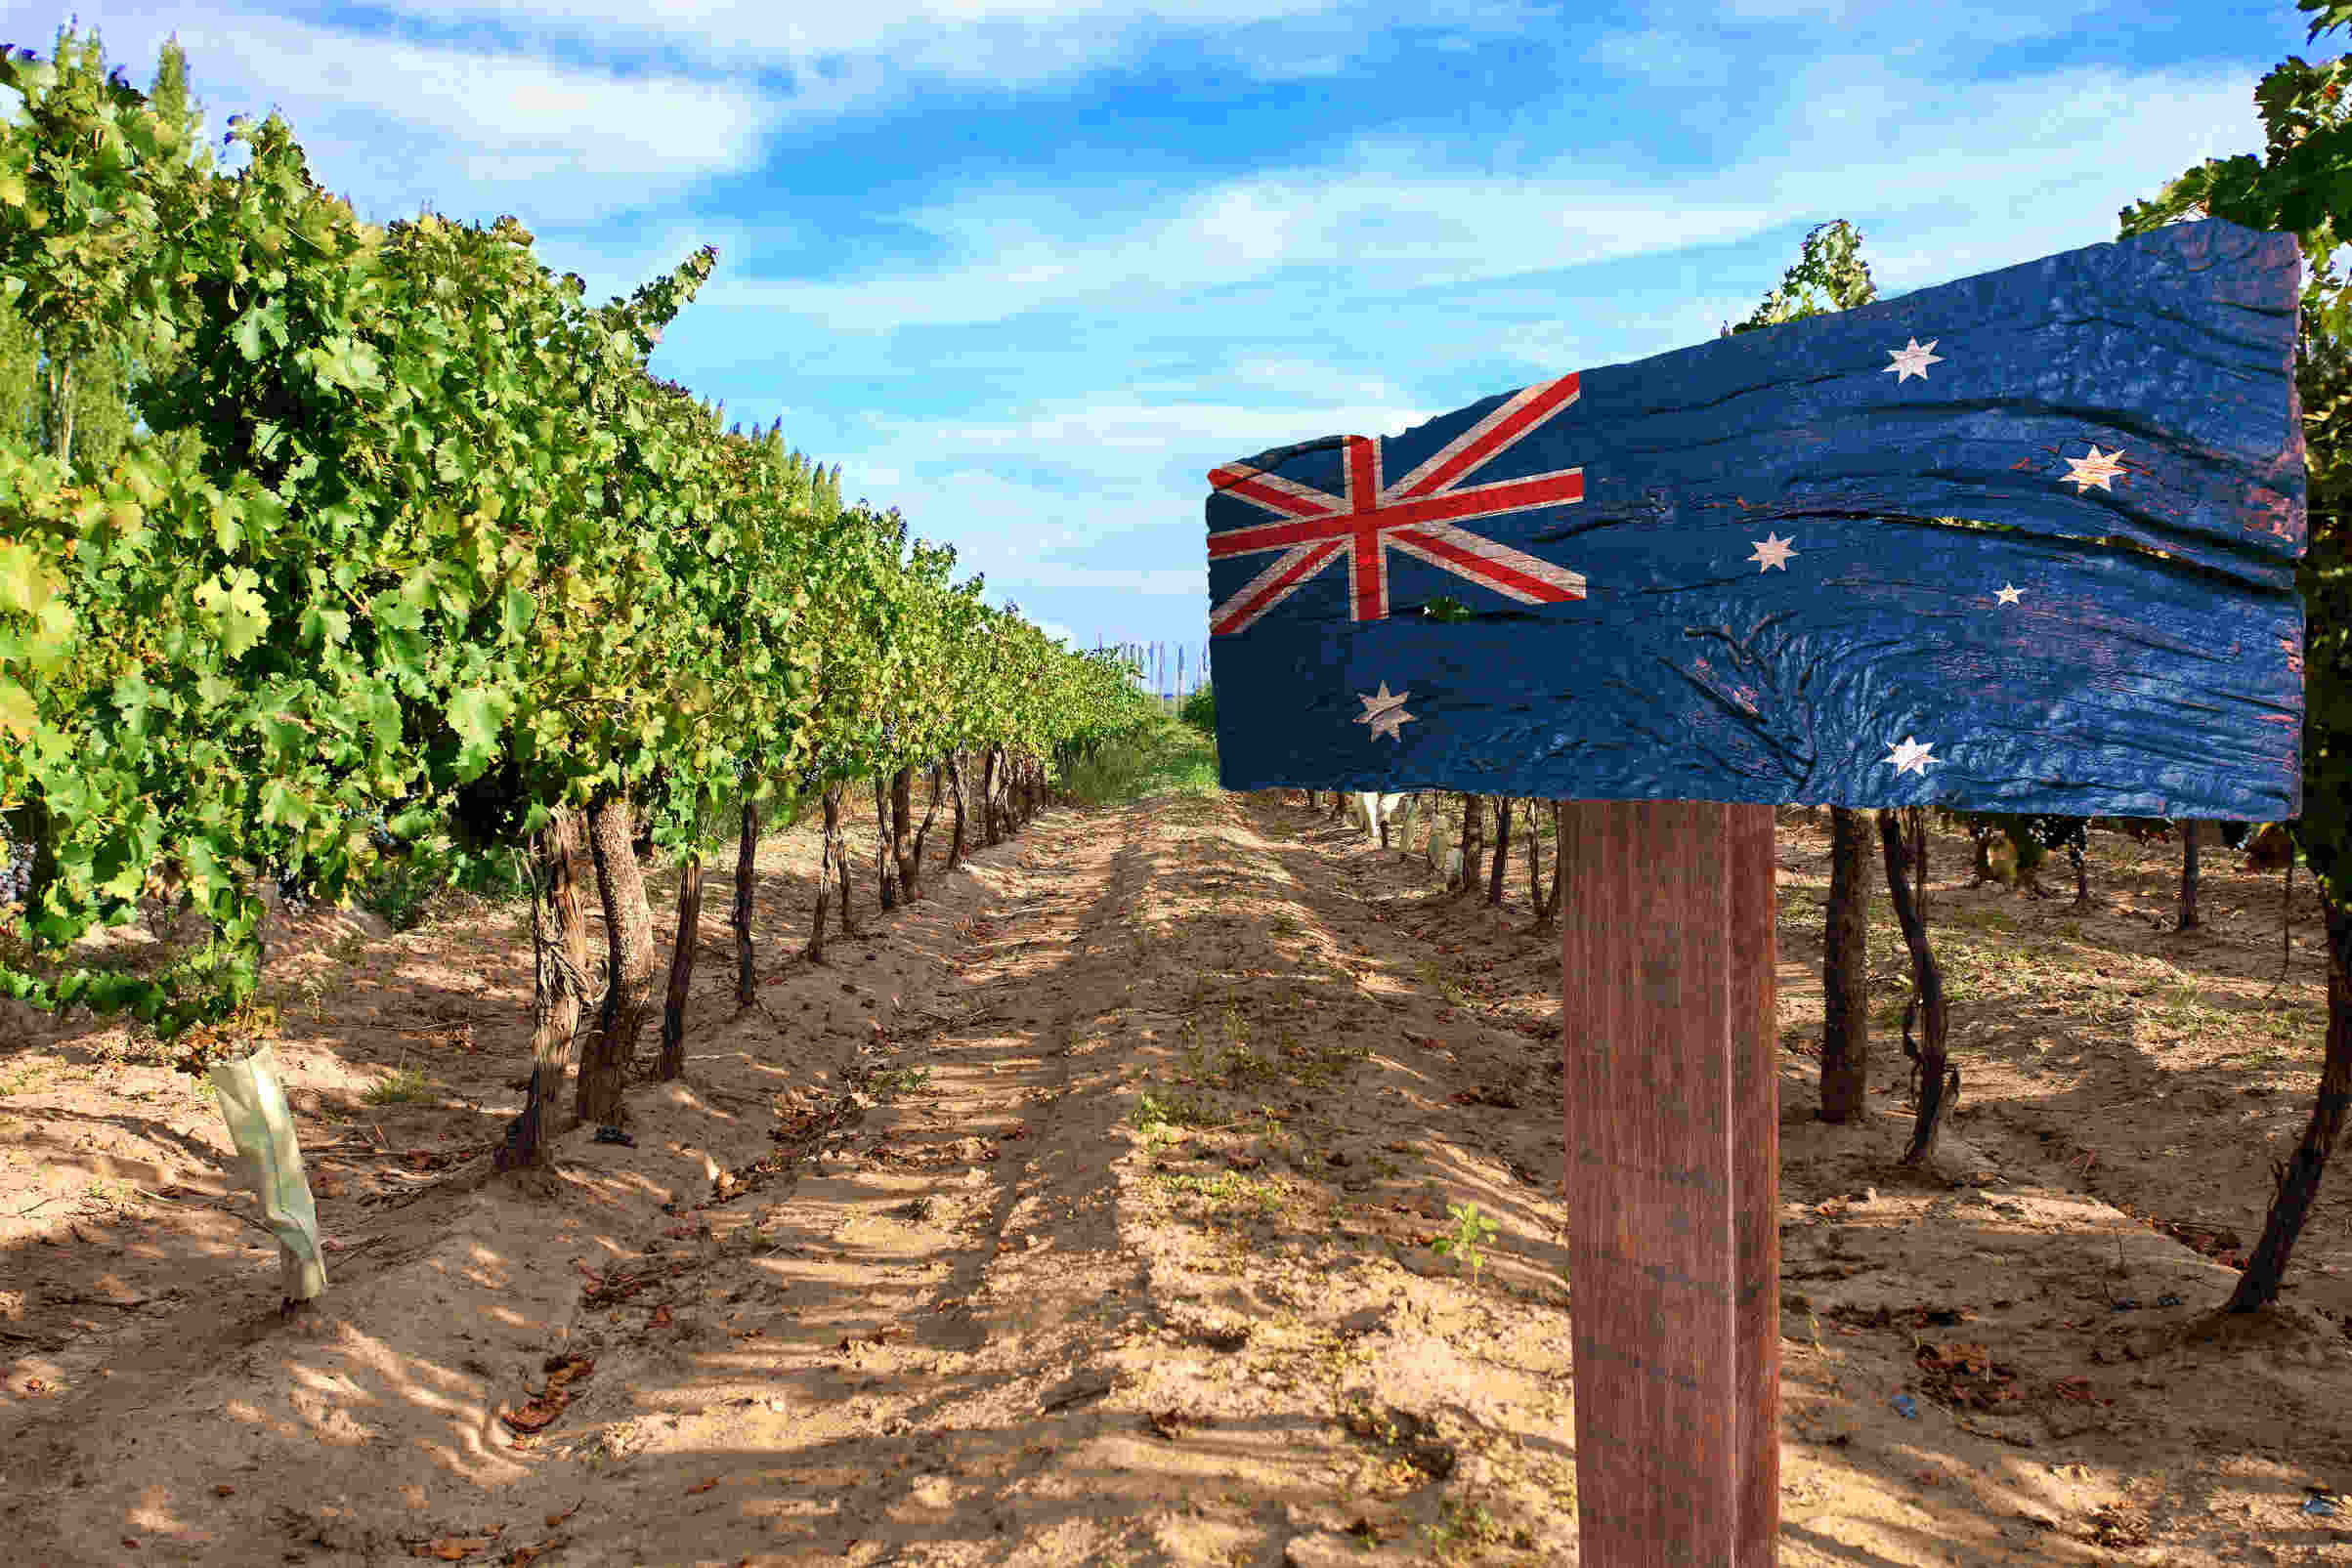 In the year to December 2016, Australia exported some $2.2 billion-worth of wine, up 7% on the previous year on volumes which expanded by 1%.